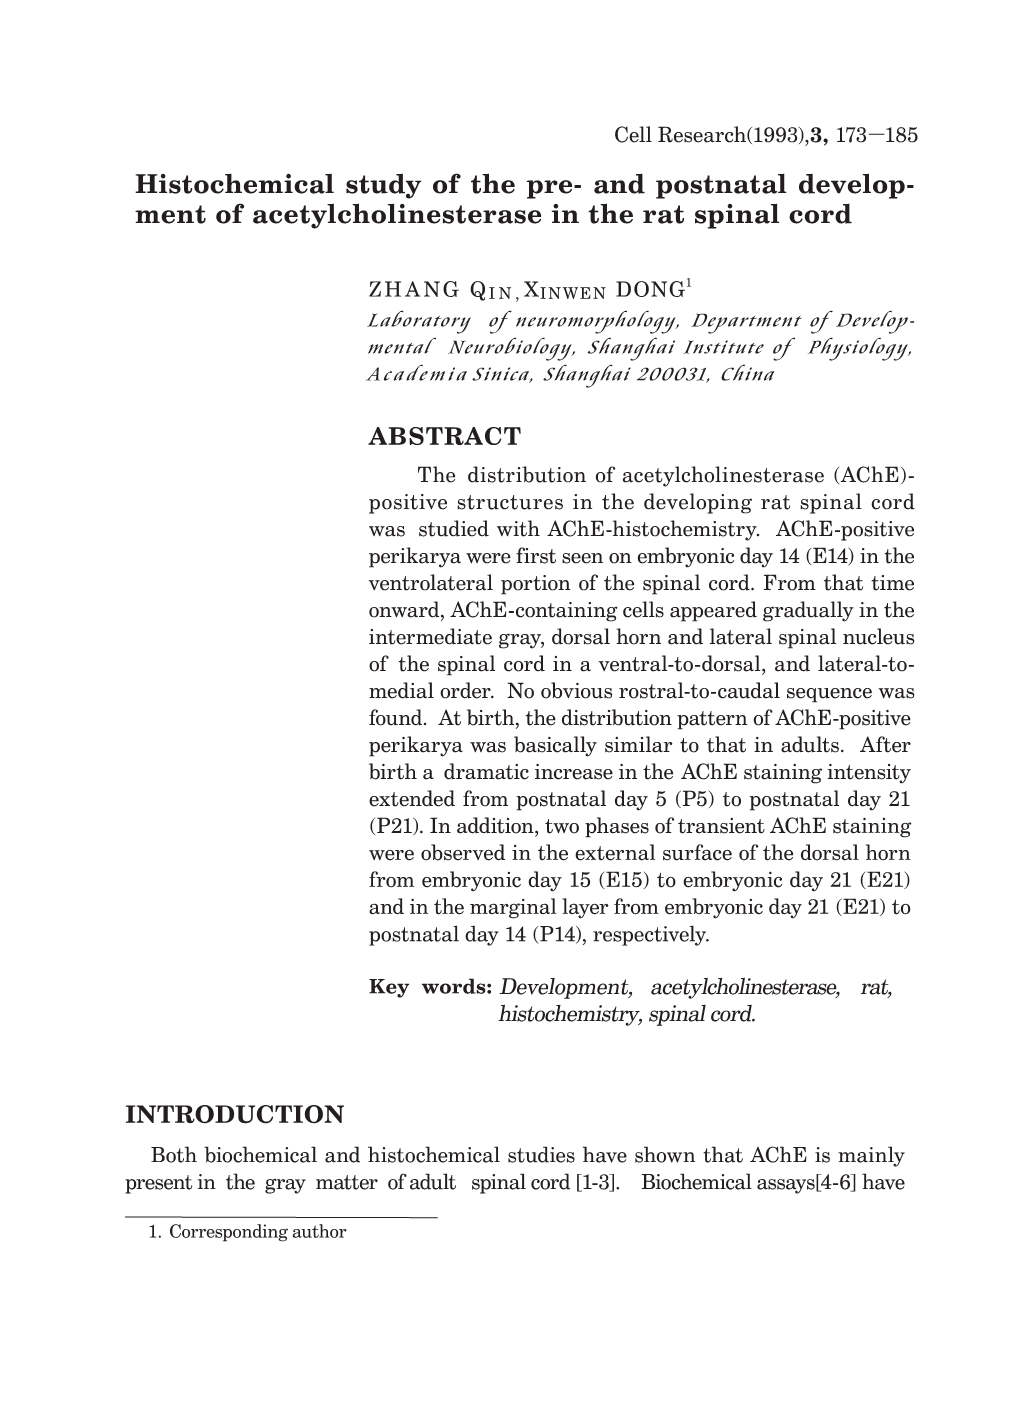 Ment of Acetylcholinesterase in the Rat Spinal Cord